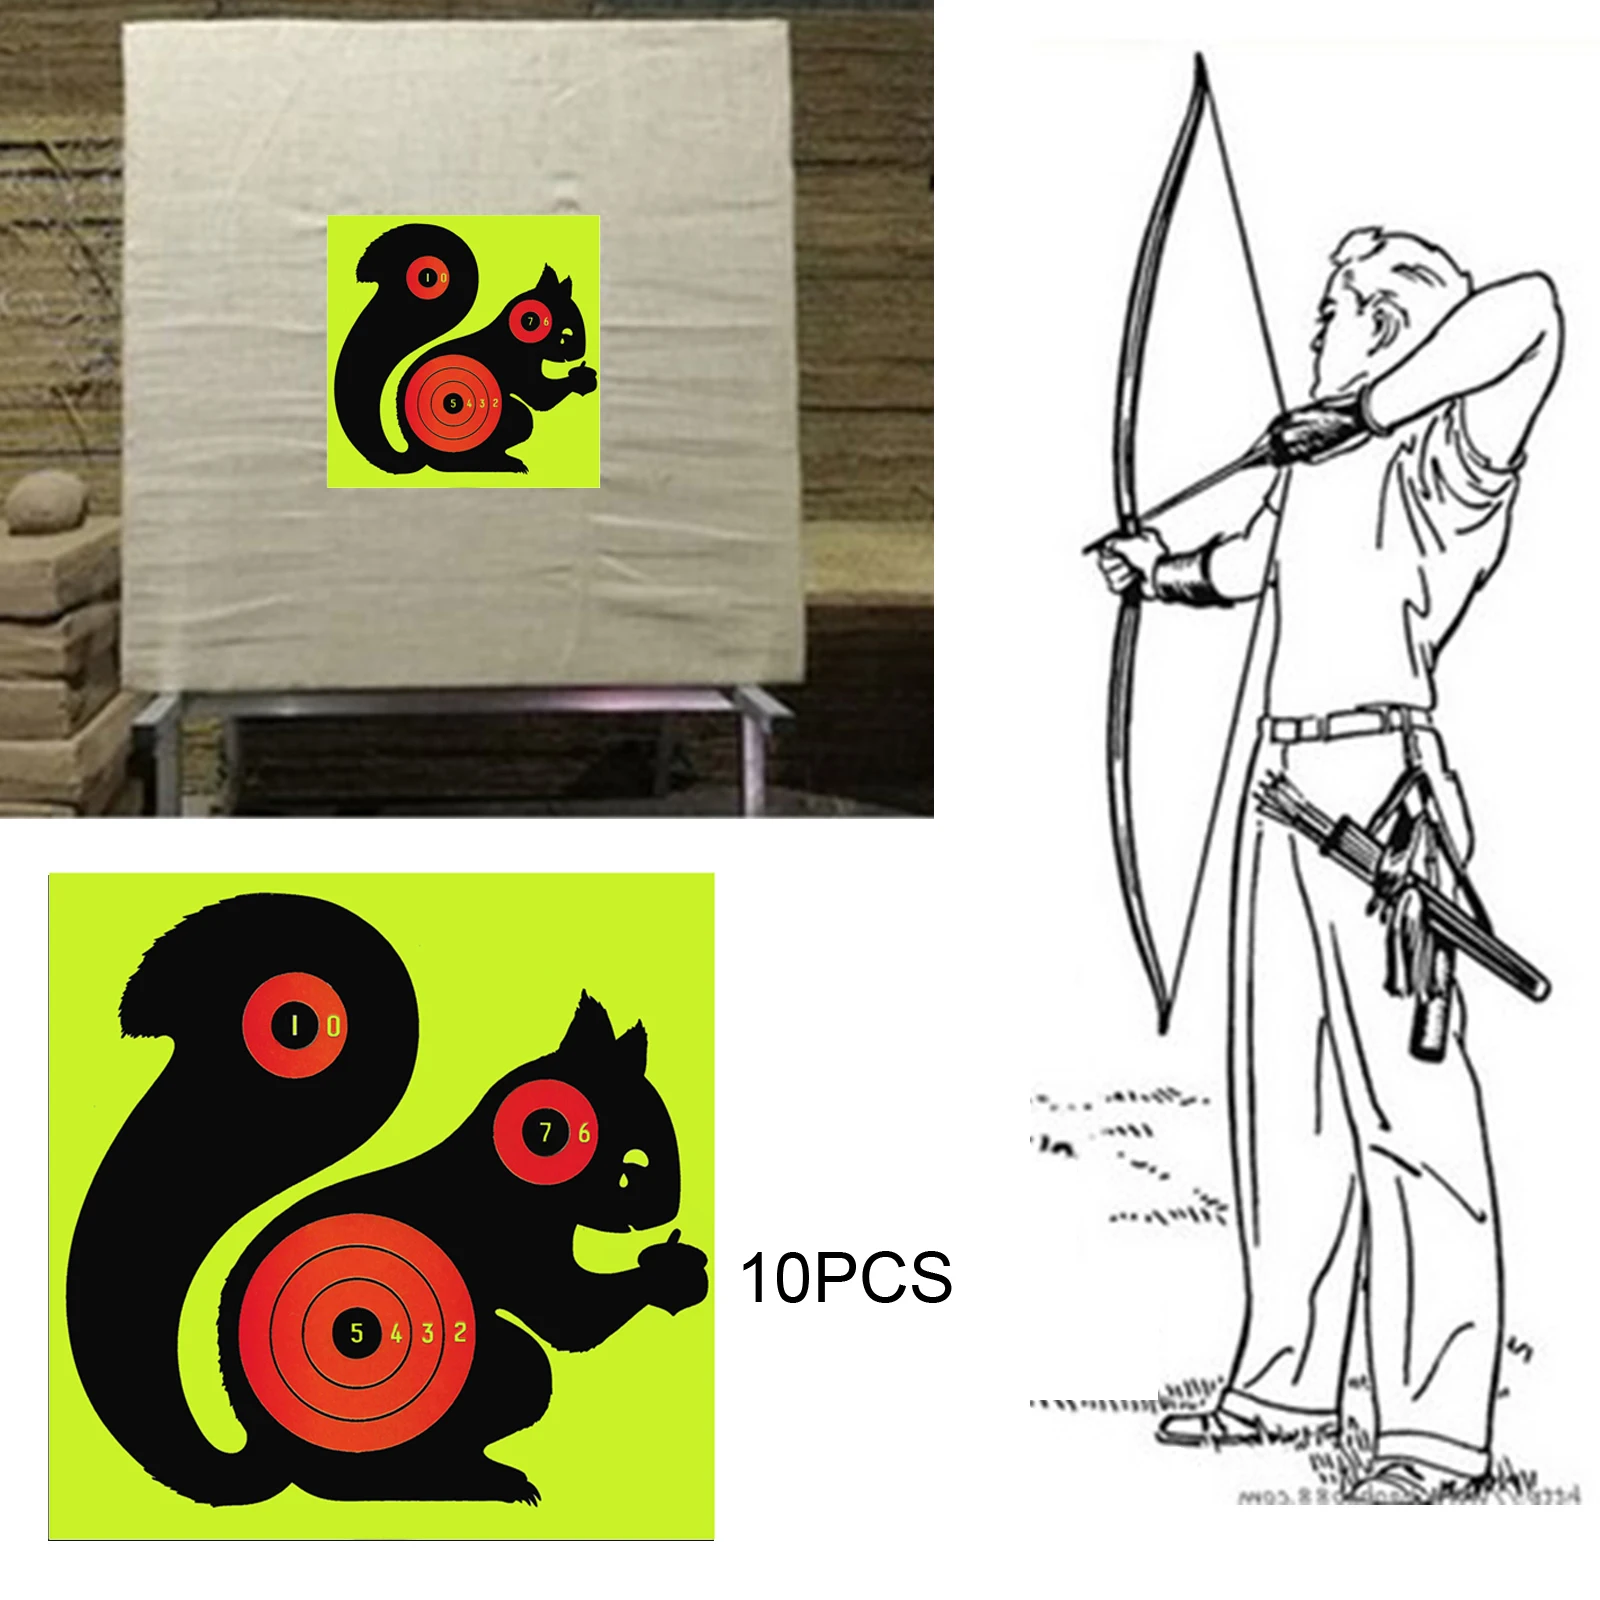 10pcs Paper Target Stickers Adhesive Reactivity Shoot Targets Outdoor Shooting Practice Hunting Training 8*8inch